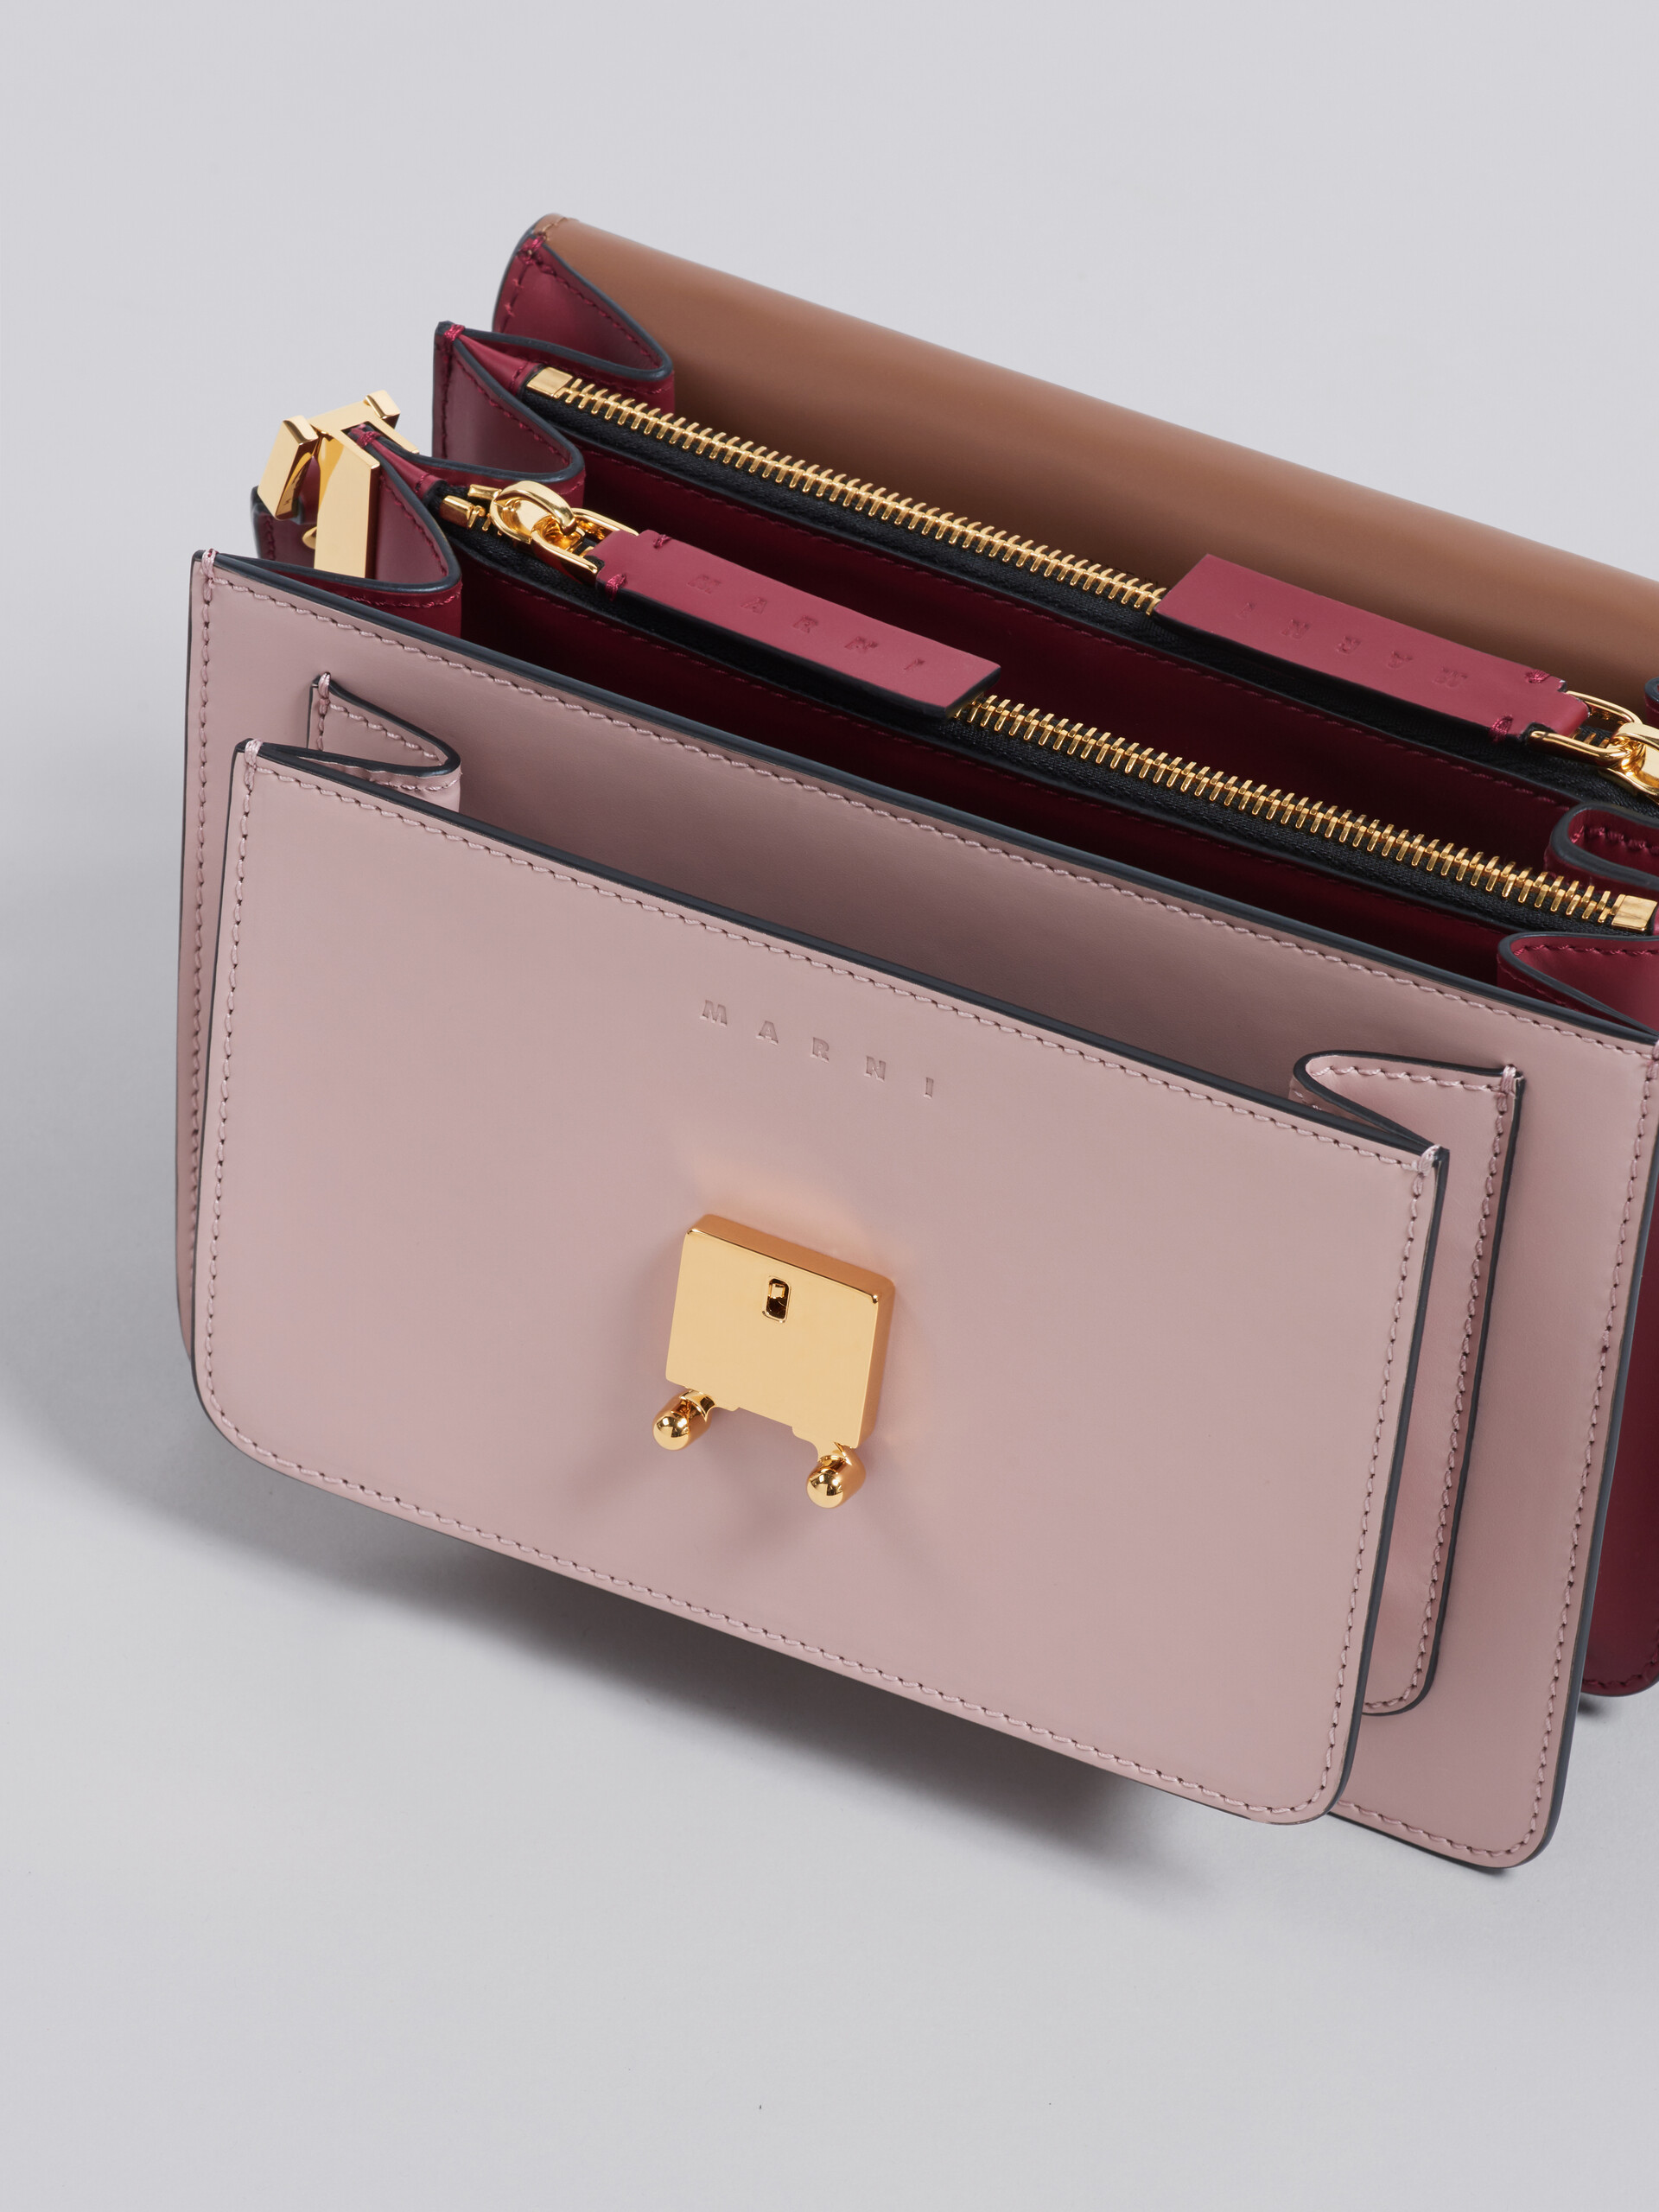 TRUNK medium bag in brown pink and red leather - Shoulder Bags - Image 3